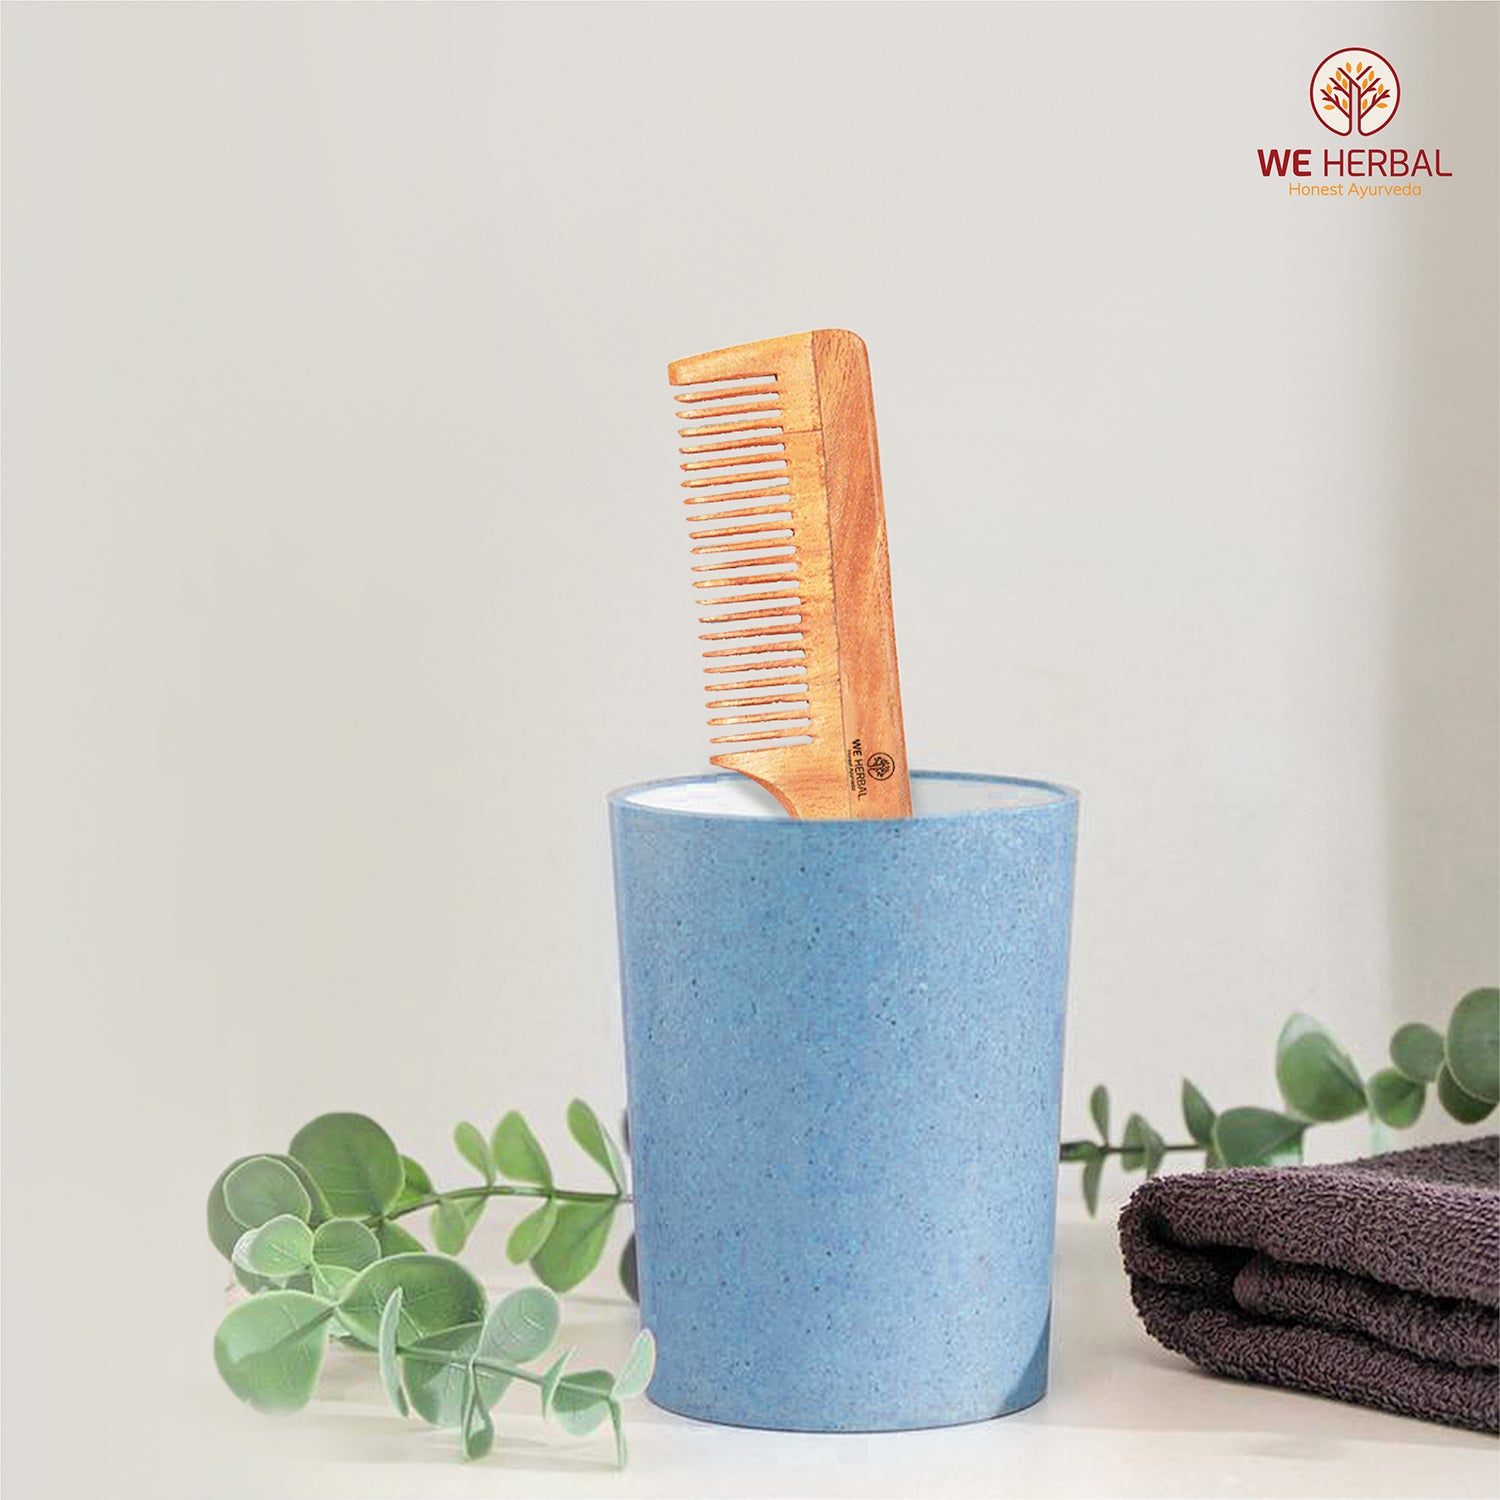 Bamboo Brush Family Pack & Pure Neem Comb Pack Combo We Herbal | Back to the Nature